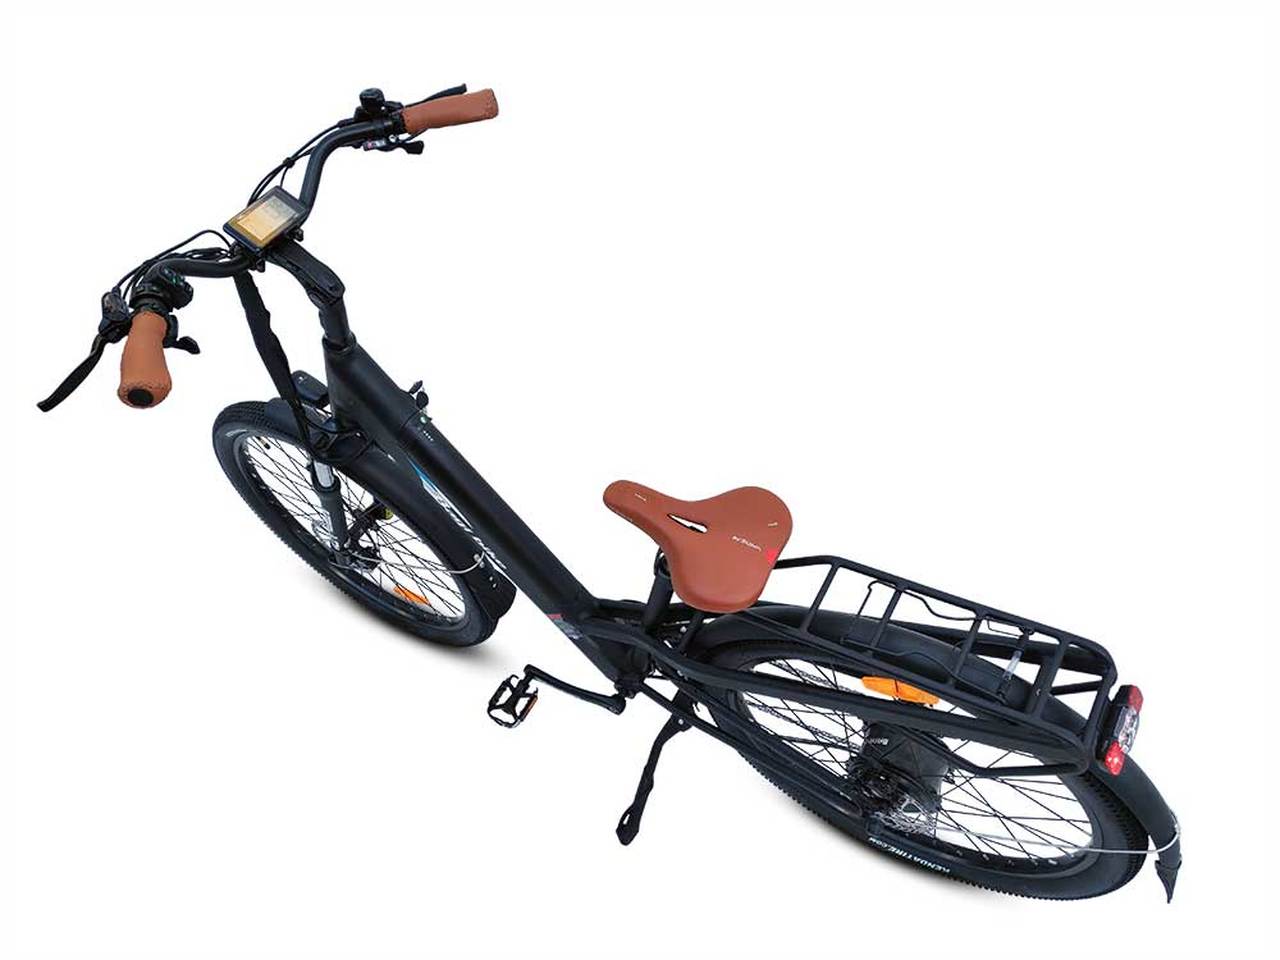 BAGIBIKE B27 TRAIL ST LOW-STEP Electric Bicycle